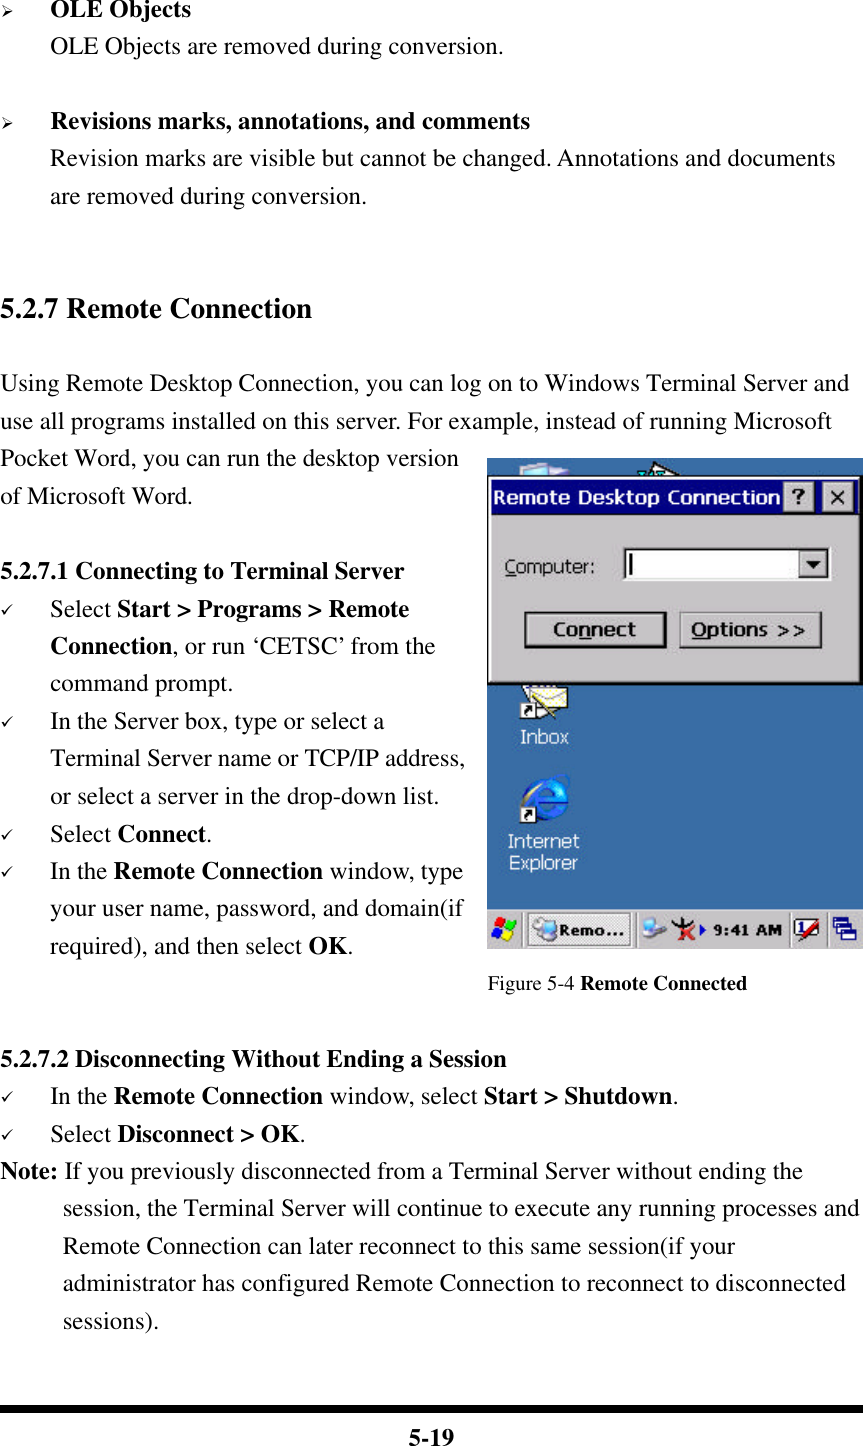  5-19  Ø OLE Objects OLE Objects are removed during conversion.  Ø Revisions marks, annotations, and comments Revision marks are visible but cannot be changed. Annotations and documents are removed during conversion.   5.2.7 Remote Connection  Using Remote Desktop Connection, you can log on to Windows Terminal Server and use all programs installed on this server. For example, instead of running Microsoft Pocket Word, you can run the desktop version of Microsoft Word.  5.2.7.1 Connecting to Terminal Server ü Select Start &gt; Programs &gt; Remote Connection, or run ‘CETSC’ from the command prompt. ü In the Server box, type or select a Terminal Server name or TCP/IP address, or select a server in the drop-down list. ü Select Connect. ü In the Remote Connection window, type your user name, password, and domain(if required), and then select OK.                                        Figure 5-4 Remote Connected  5.2.7.2 Disconnecting Without Ending a Session ü In the Remote Connection window, select Start &gt; Shutdown. ü Select Disconnect &gt; OK. Note: If you previously disconnected from a Terminal Server without ending the session, the Terminal Server will continue to execute any running processes and Remote Connection can later reconnect to this same session(if your administrator has configured Remote Connection to reconnect to disconnected sessions).  